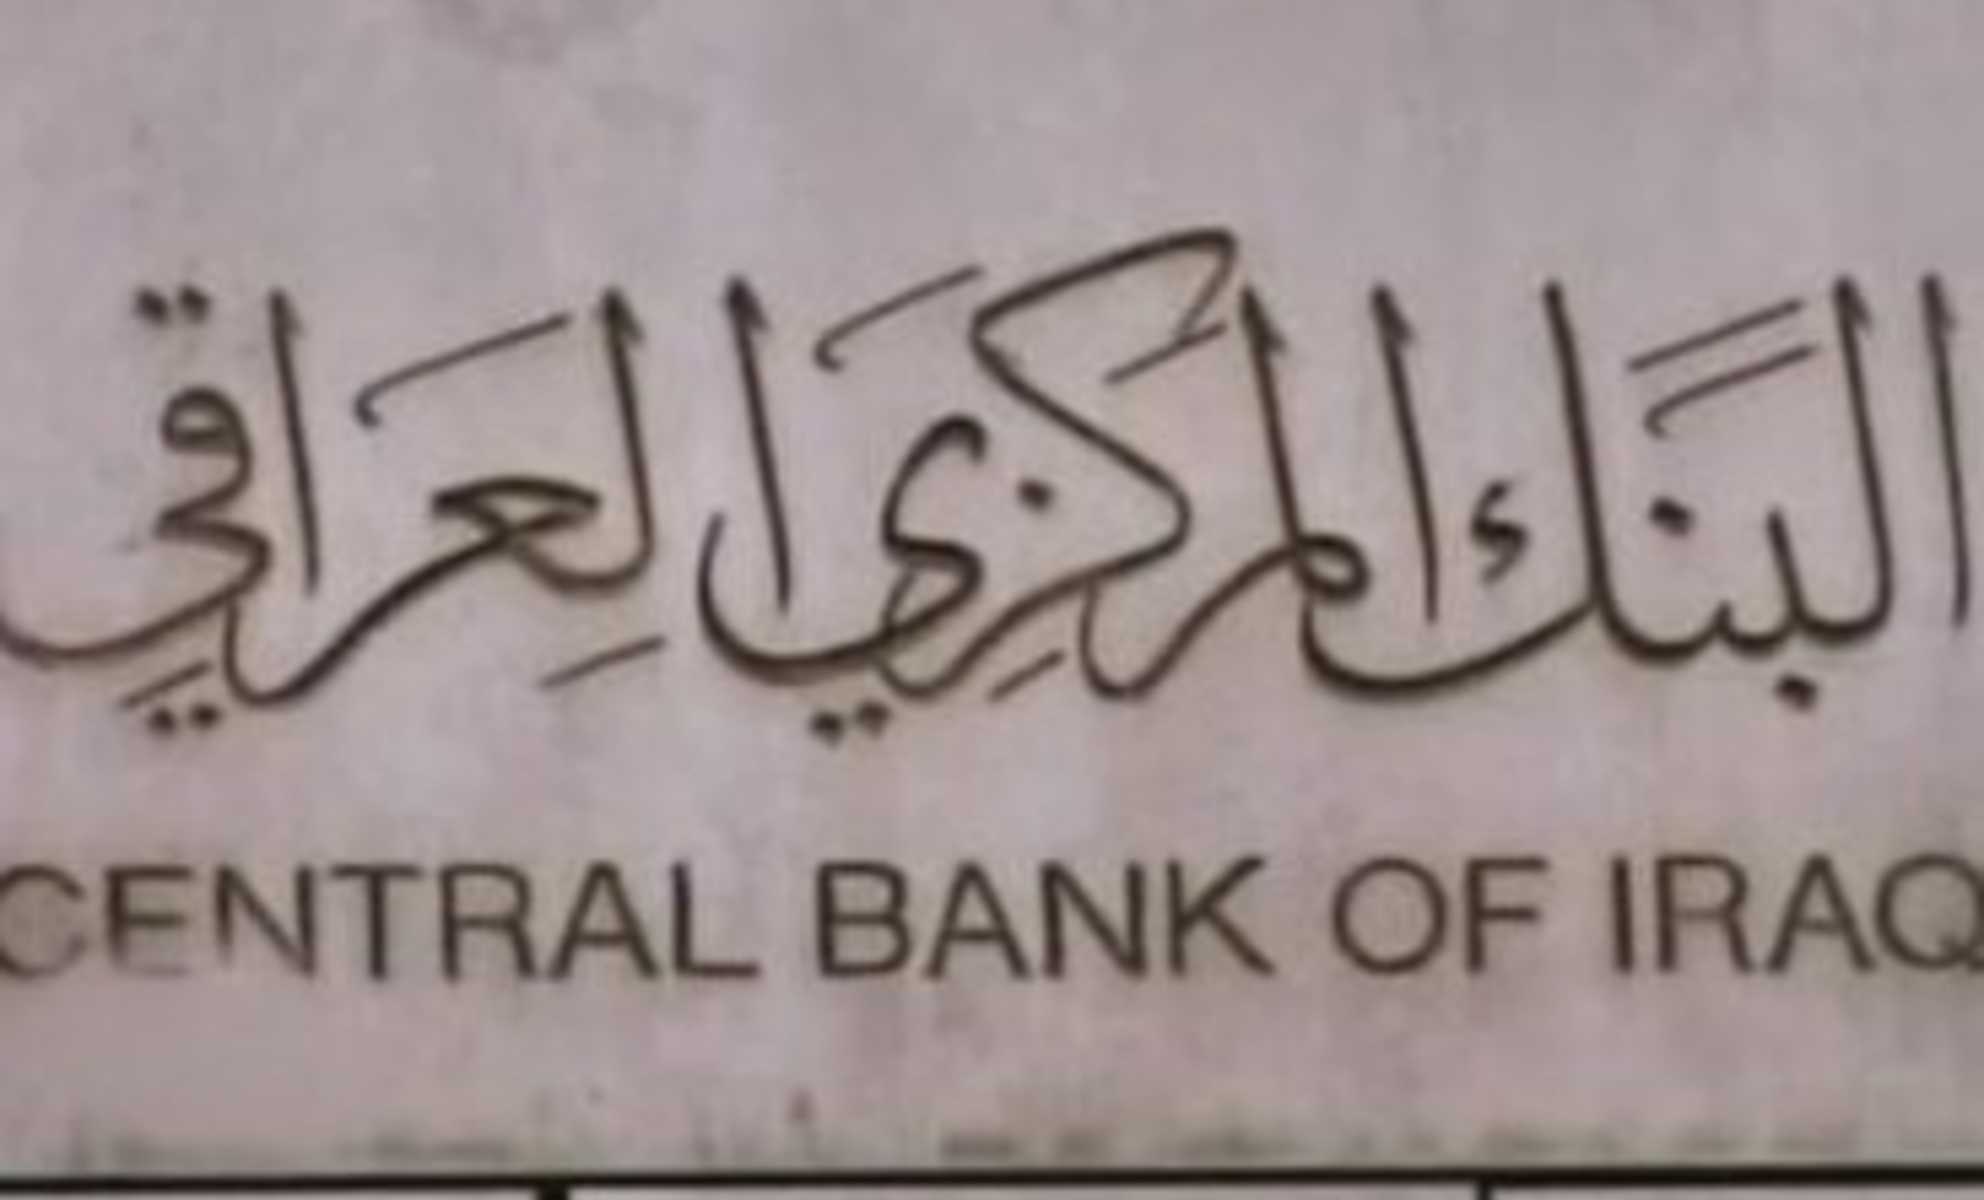 Today.. Al-Alaq sells more than (300) million dollars to the banks of the framework parties